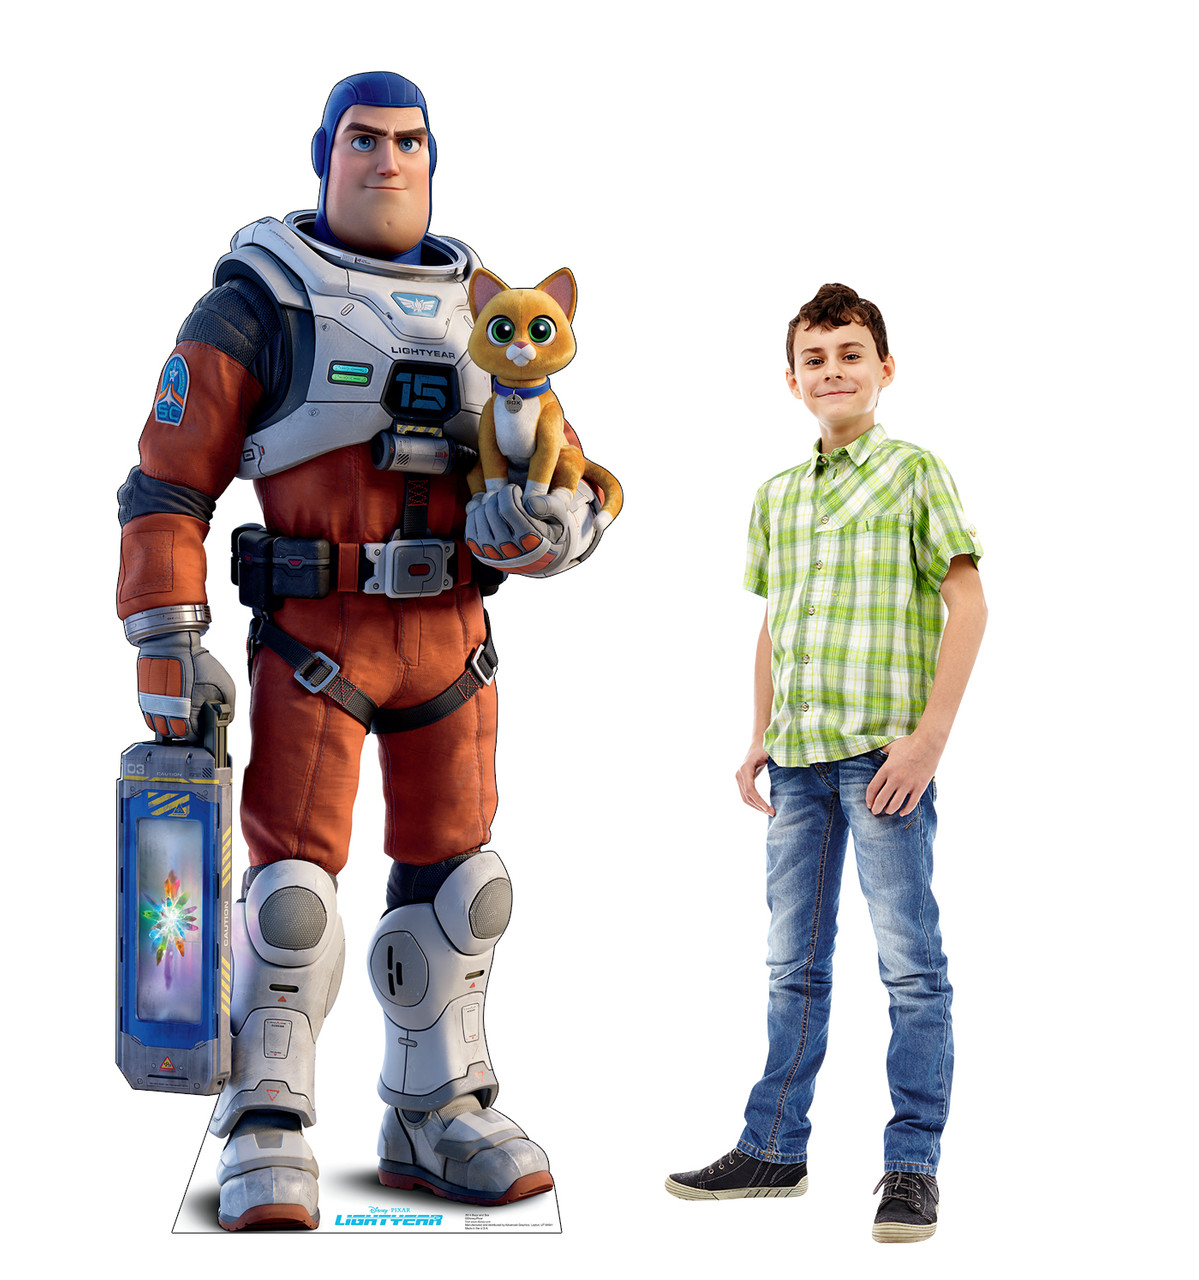 Life-size cardboard standee of Buzz and Sox from Disney/Pixar movie Lightyear with model.